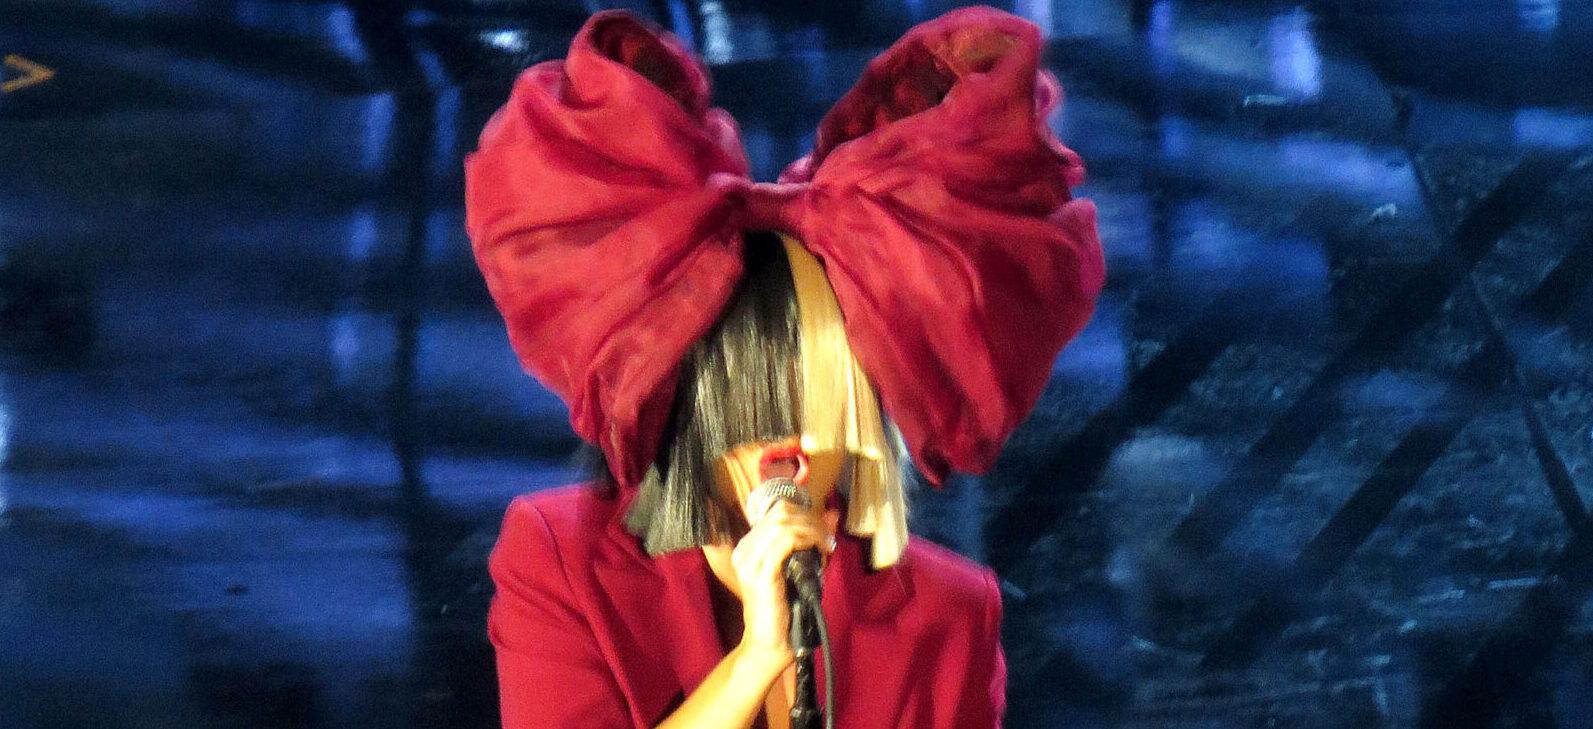 Singer Sia’s Fans Praise Her ‘Choice To Alter My Appearance’ With Liposuction